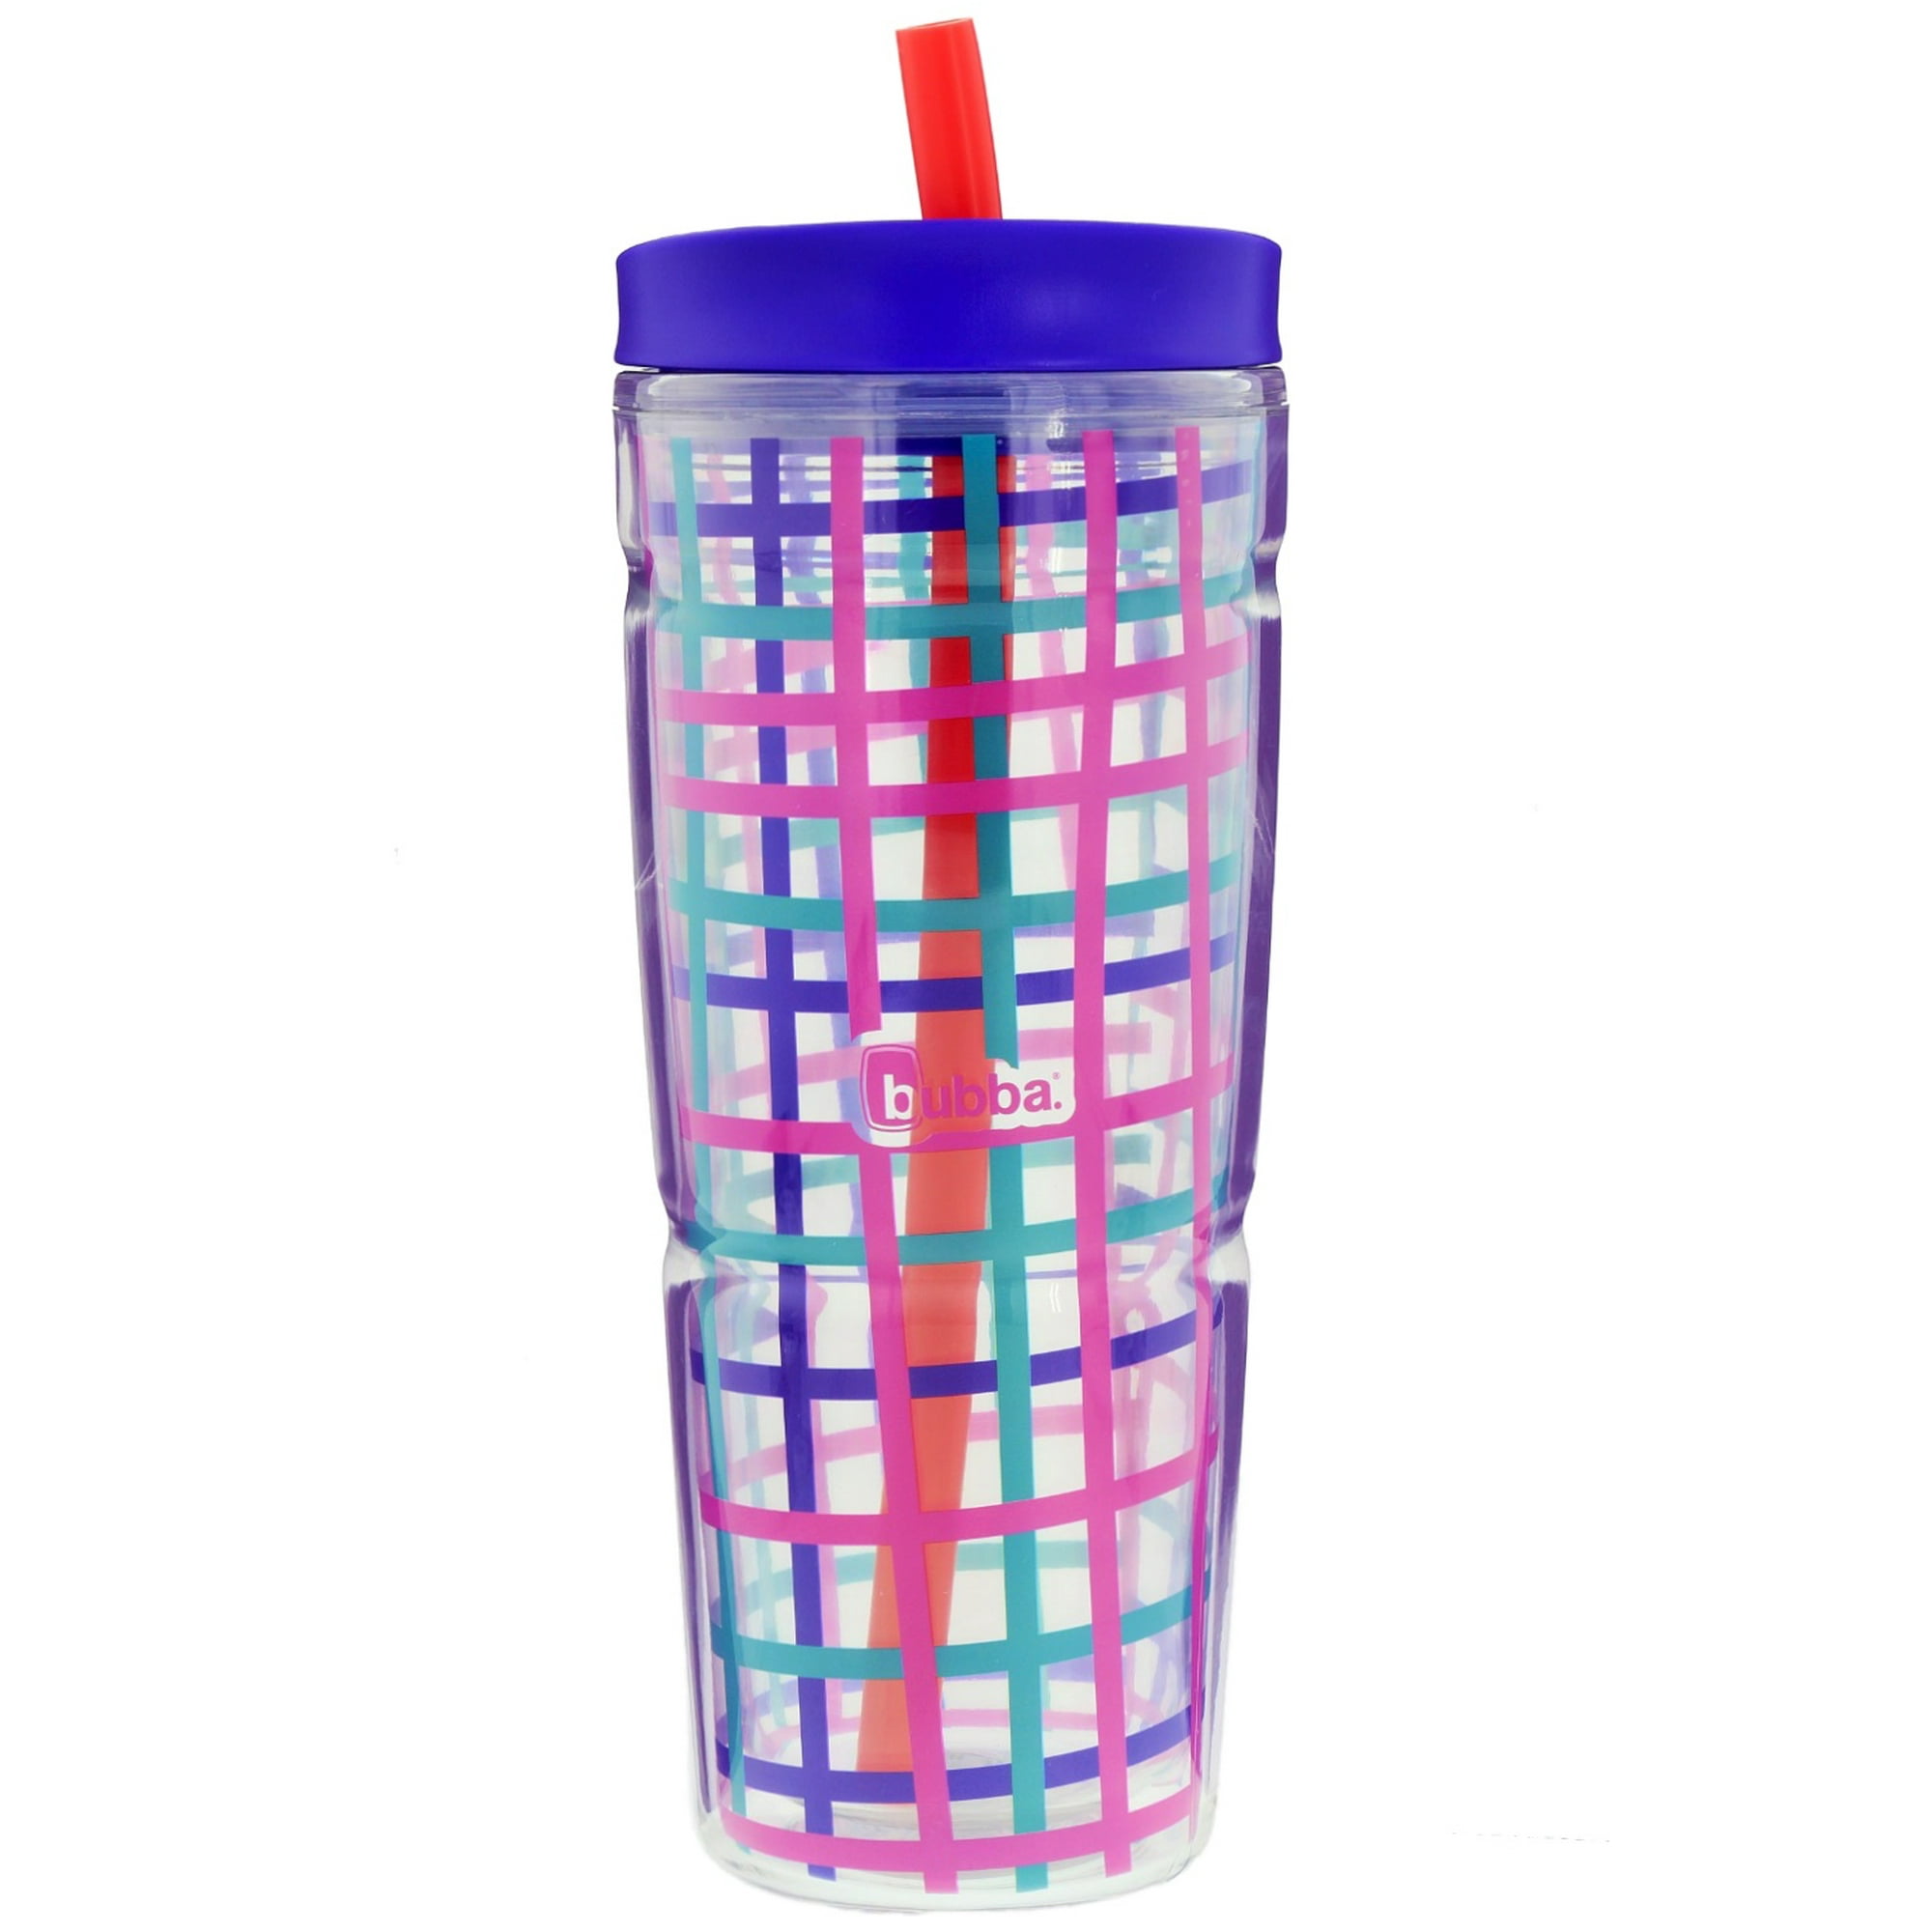 24oz Insulated Tumbler with Straw | Thermos Brand Granite